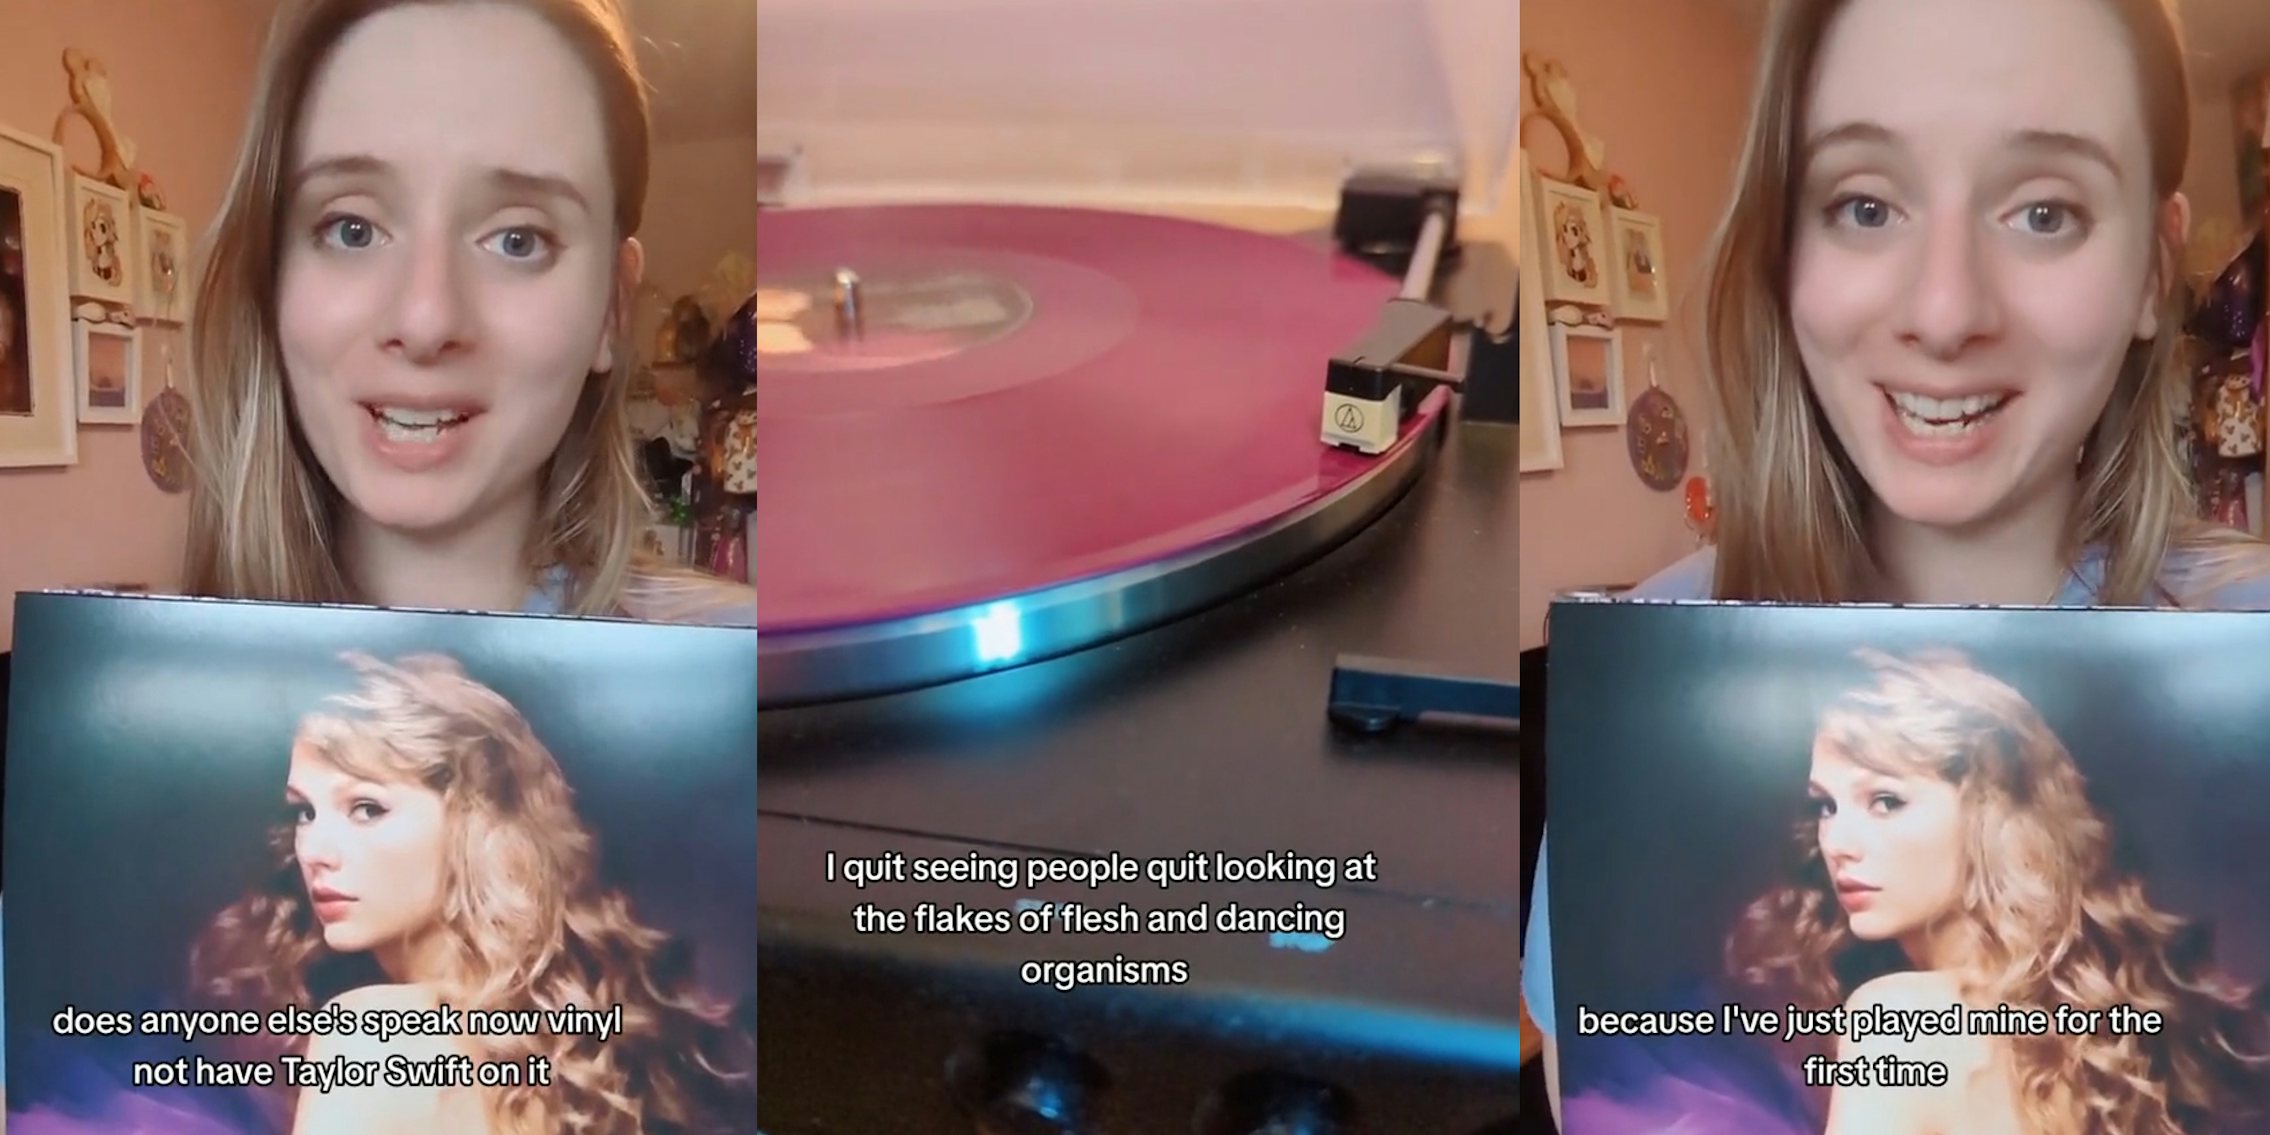 Taylor Swift fan with vinyl with caption 'does anyone else's speak now vinyl not have Taylor Swift on it?' (l) Taylor Swift vinyl playing with caption 'I quit people quit looking at the flakes of flesh and dancing organisms' (c) Taylor Swift fan with vinyl with caption 'because I've just played mine for the first time' (r)